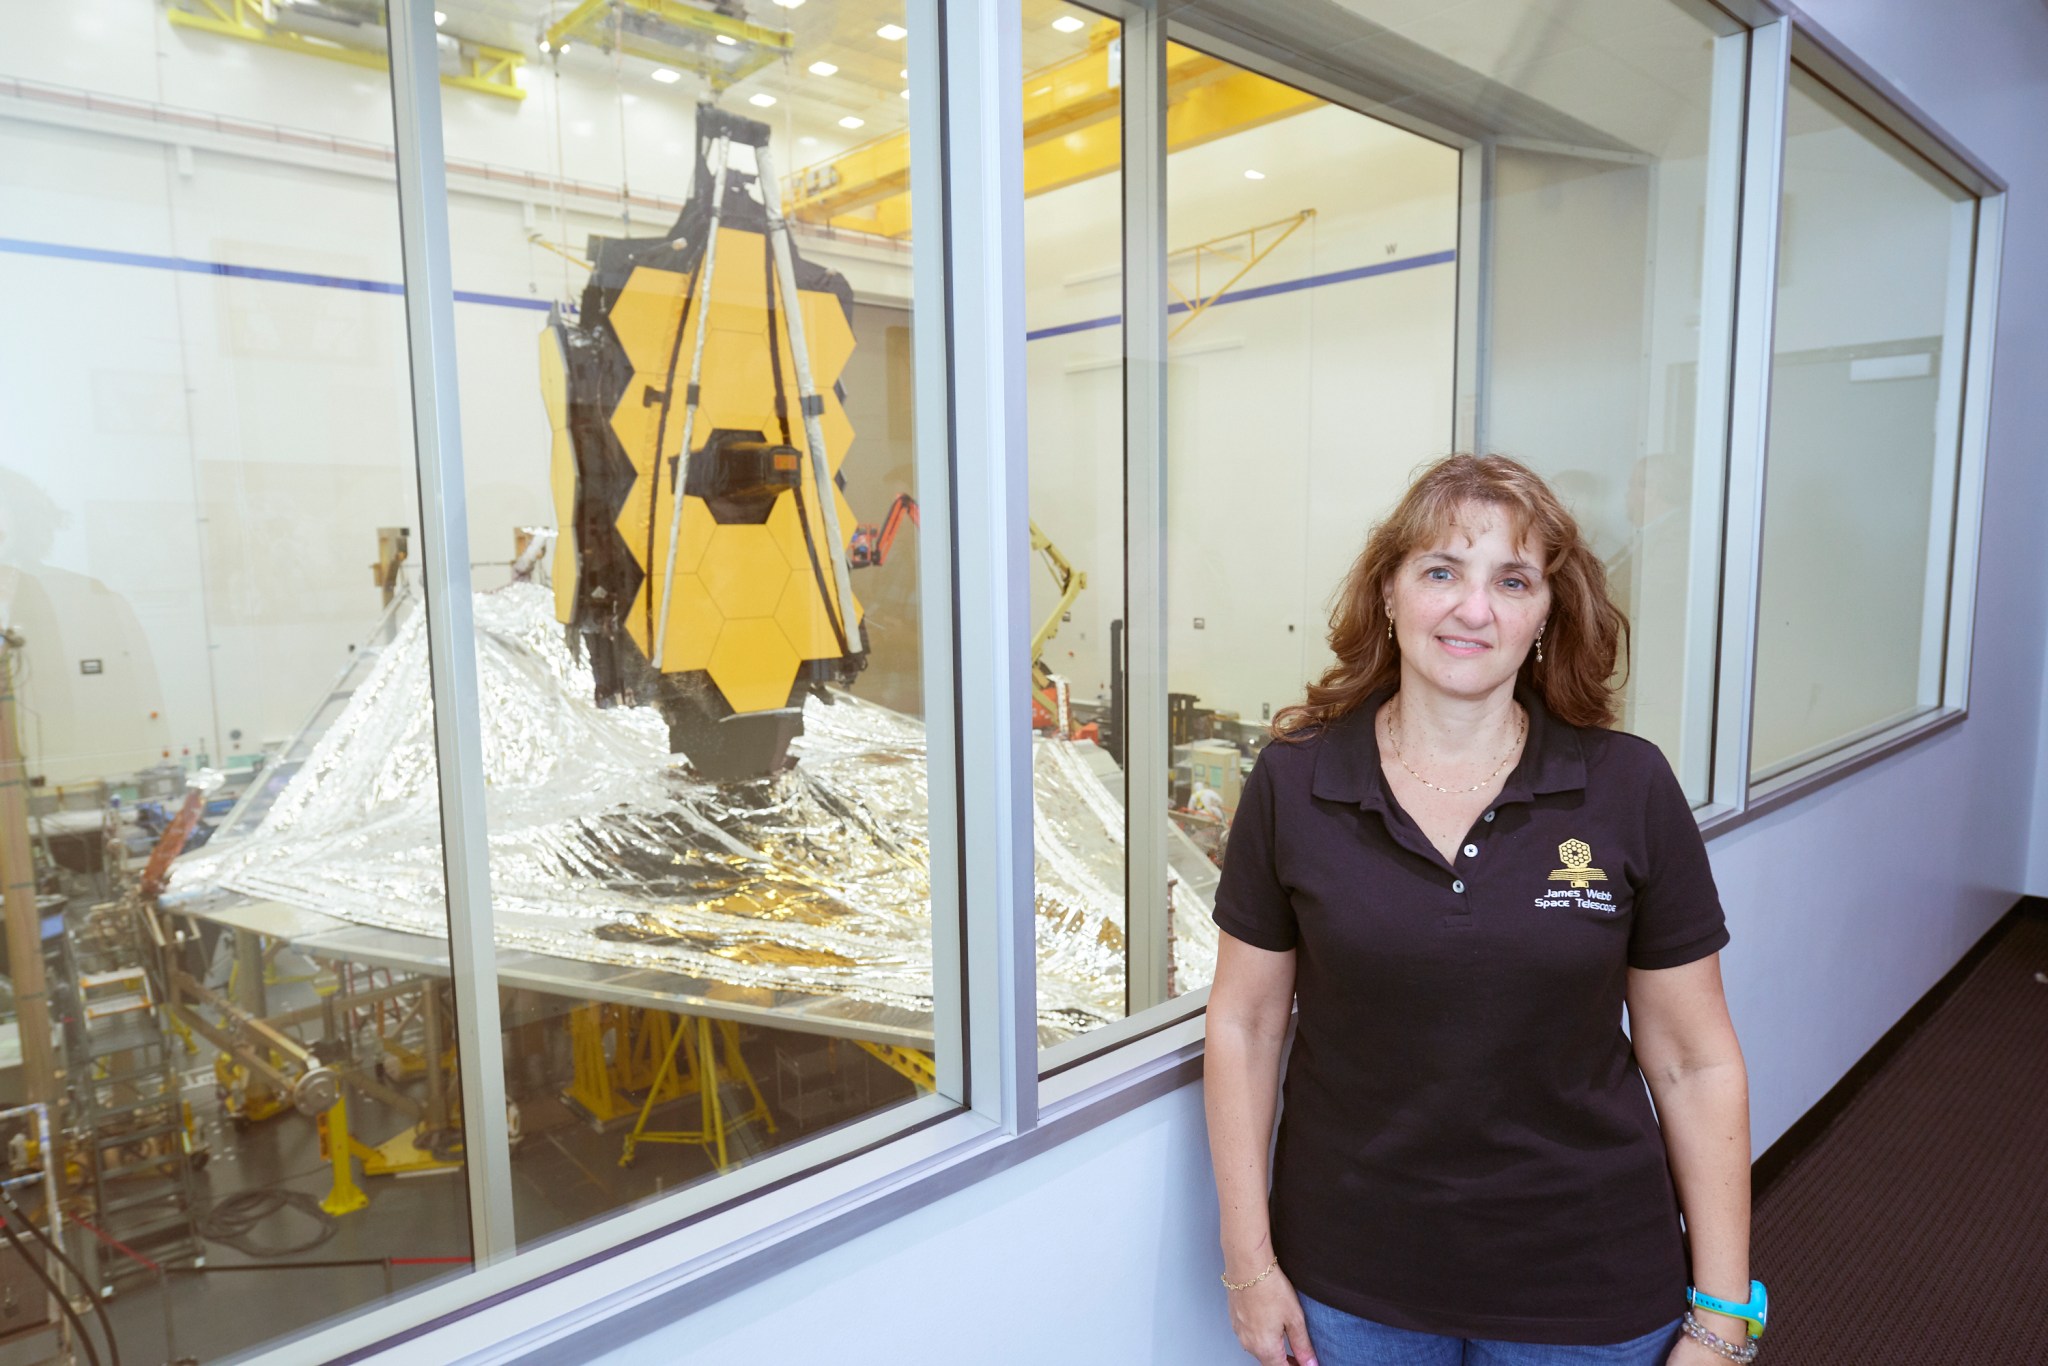 Sandra Irish stands in from of a cleanroom window with the James Webb Space Telescope visible in the cleanroom shown in the background.